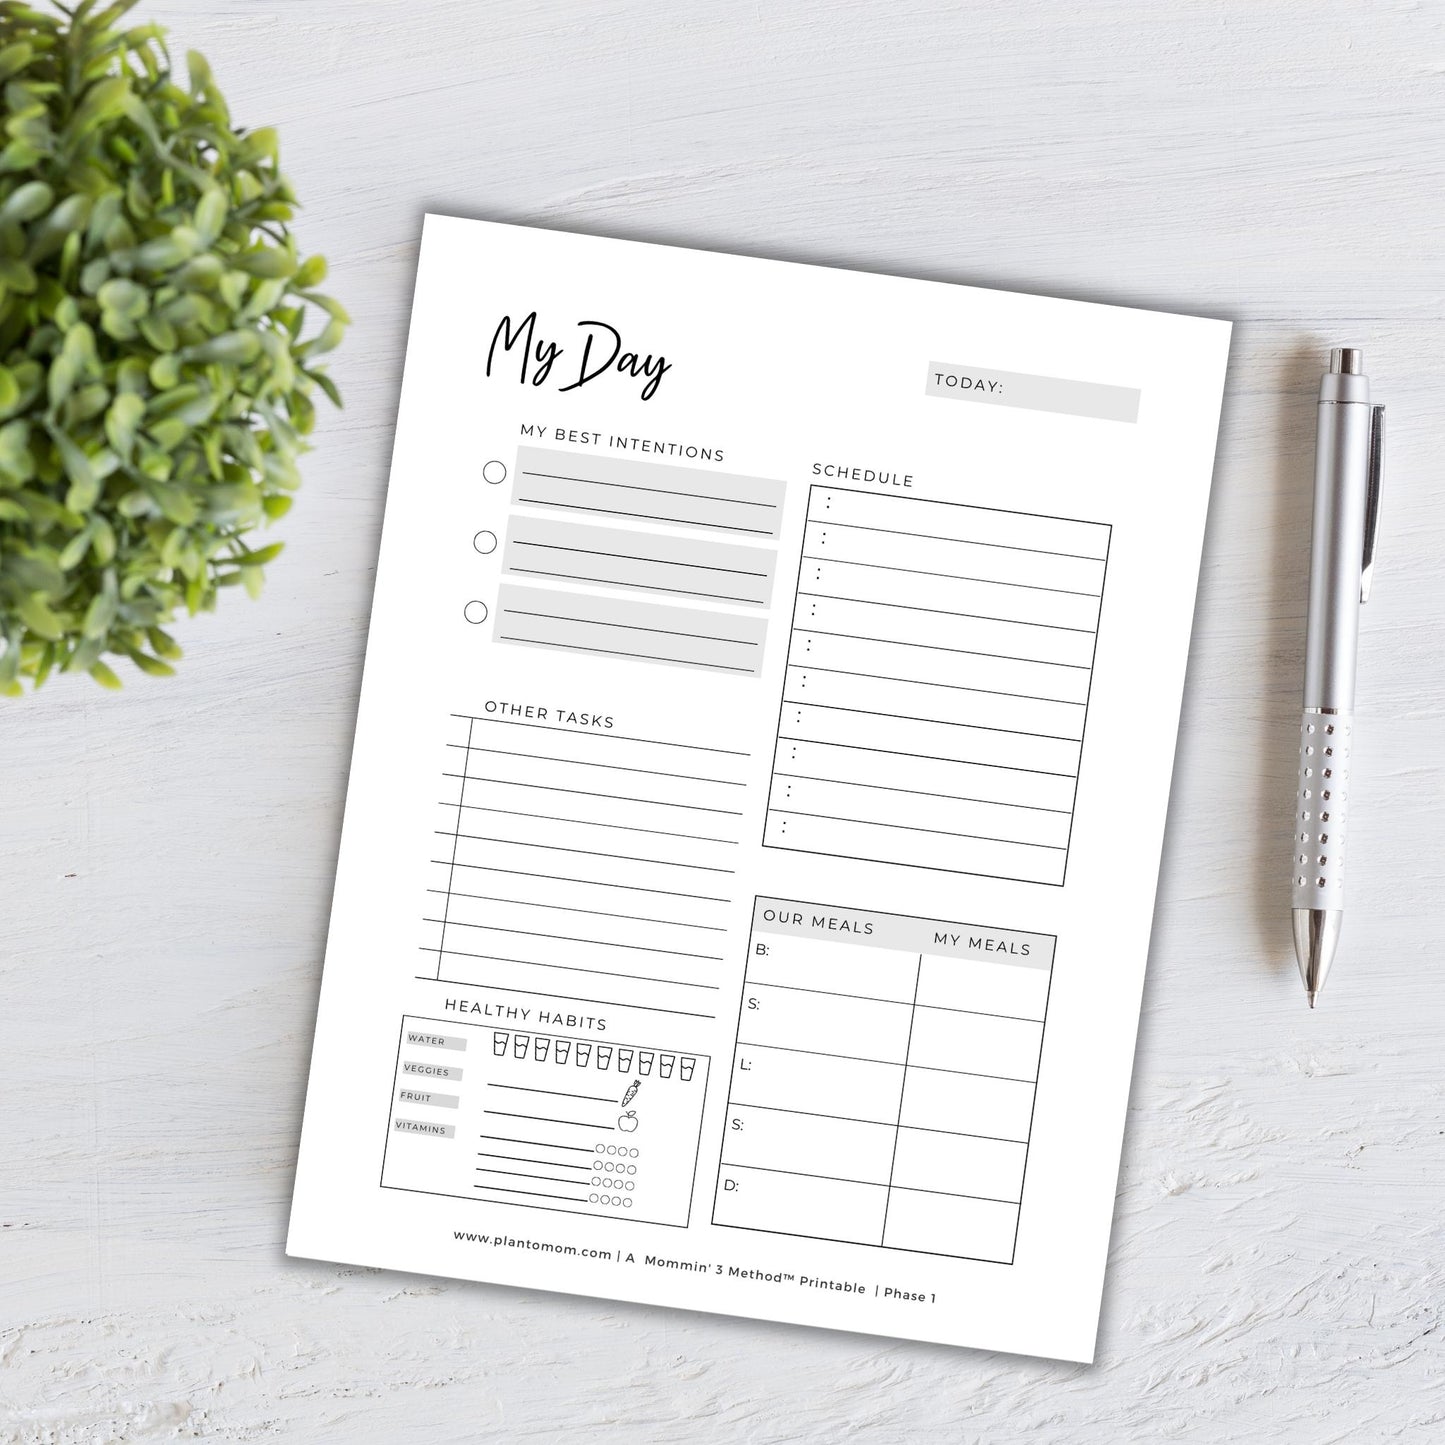 PRINTABLE DAILY PLANNER BUNDLE OF 5 - US LETTER COLOR 'MY DAY' LAYOUT